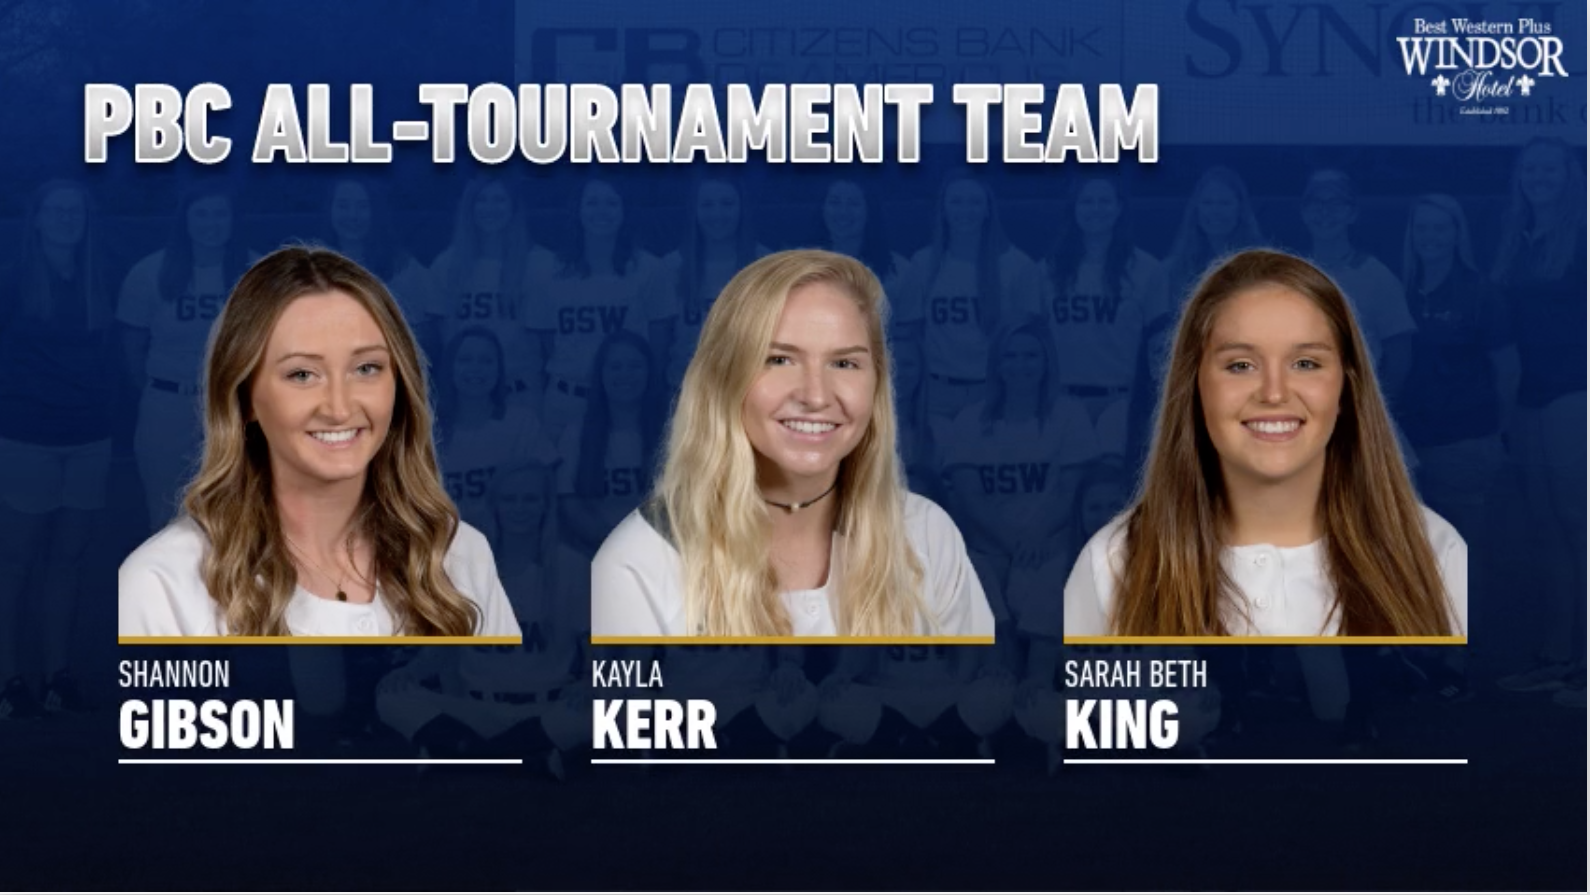 Gibson, Kerr & King Named To All-Tournament Team